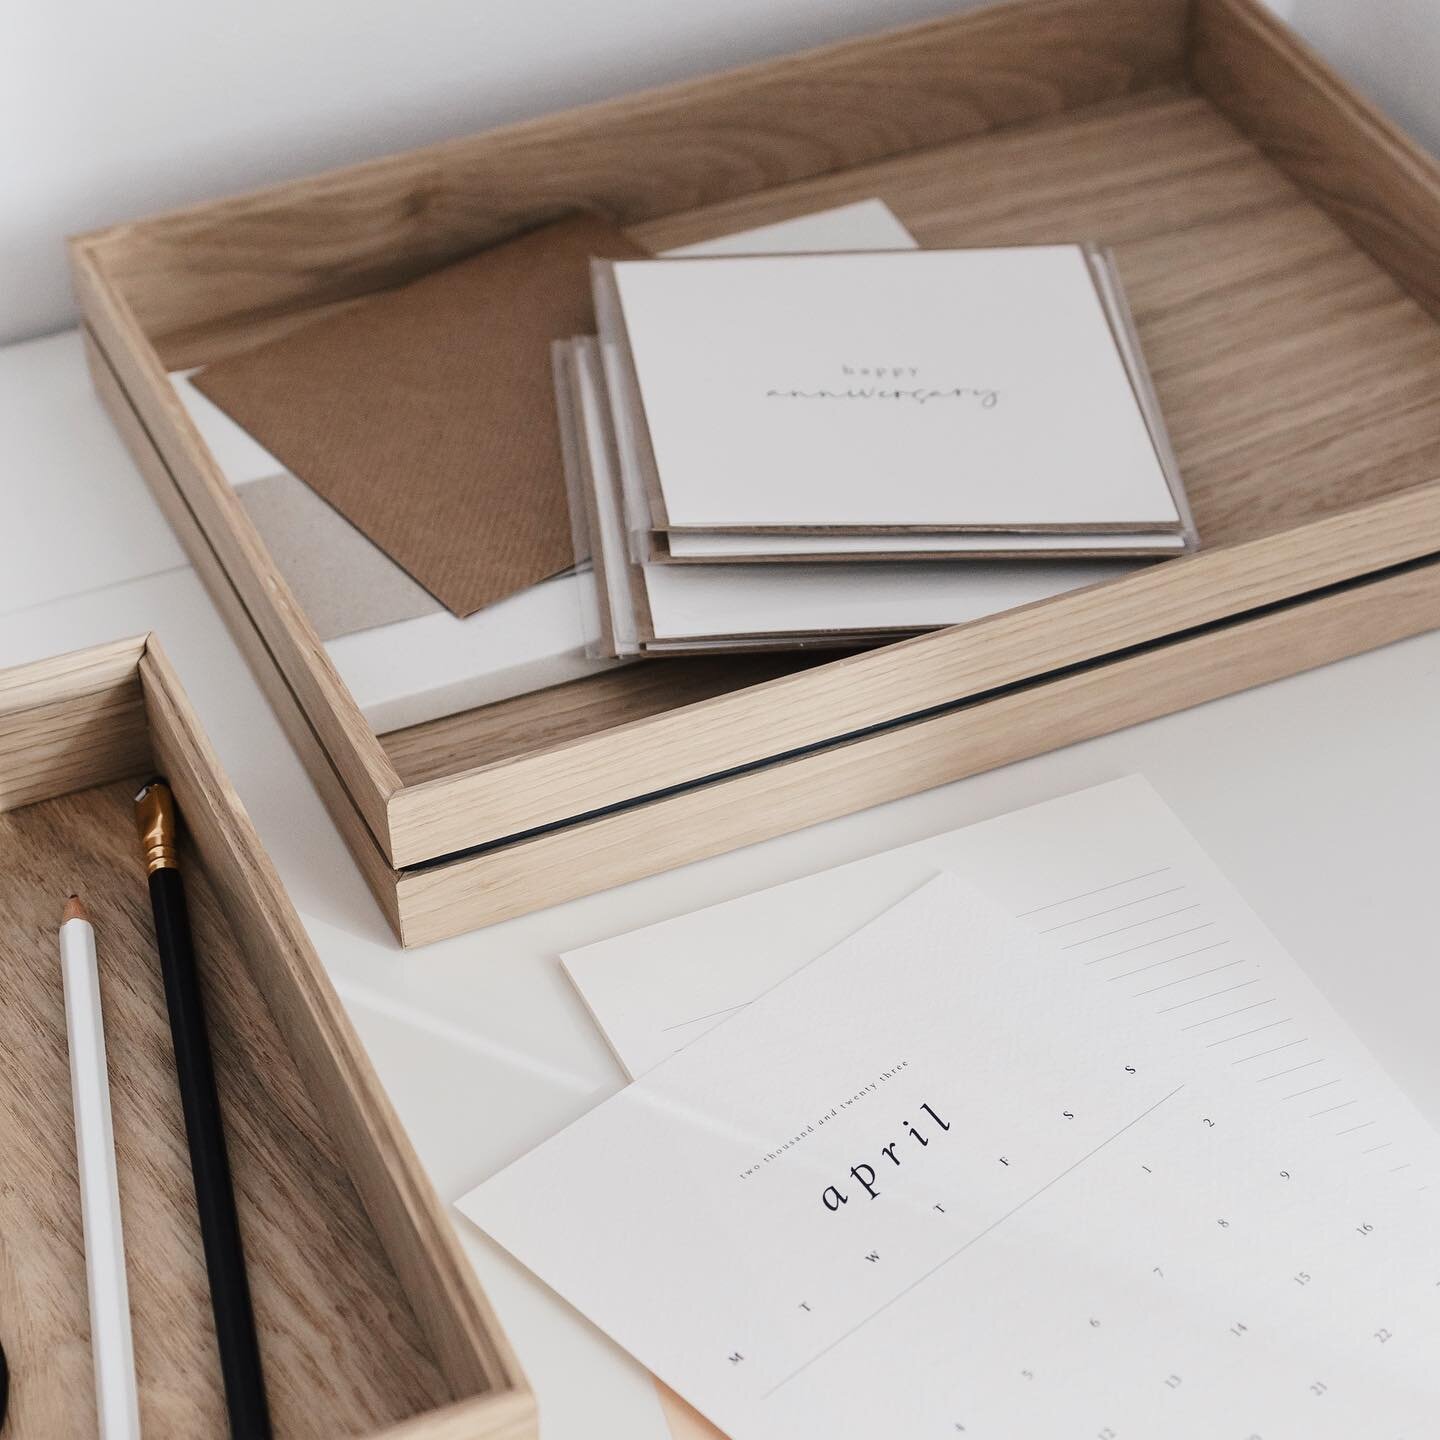 Soft unfinished oak, cleverly crafted into trays to organize all your things. Held together with a single rubber band, ingeniously designed by @moebe. 

Danish design at the forefront underpinned by circularity and sustainability. 

Shop your Organiz